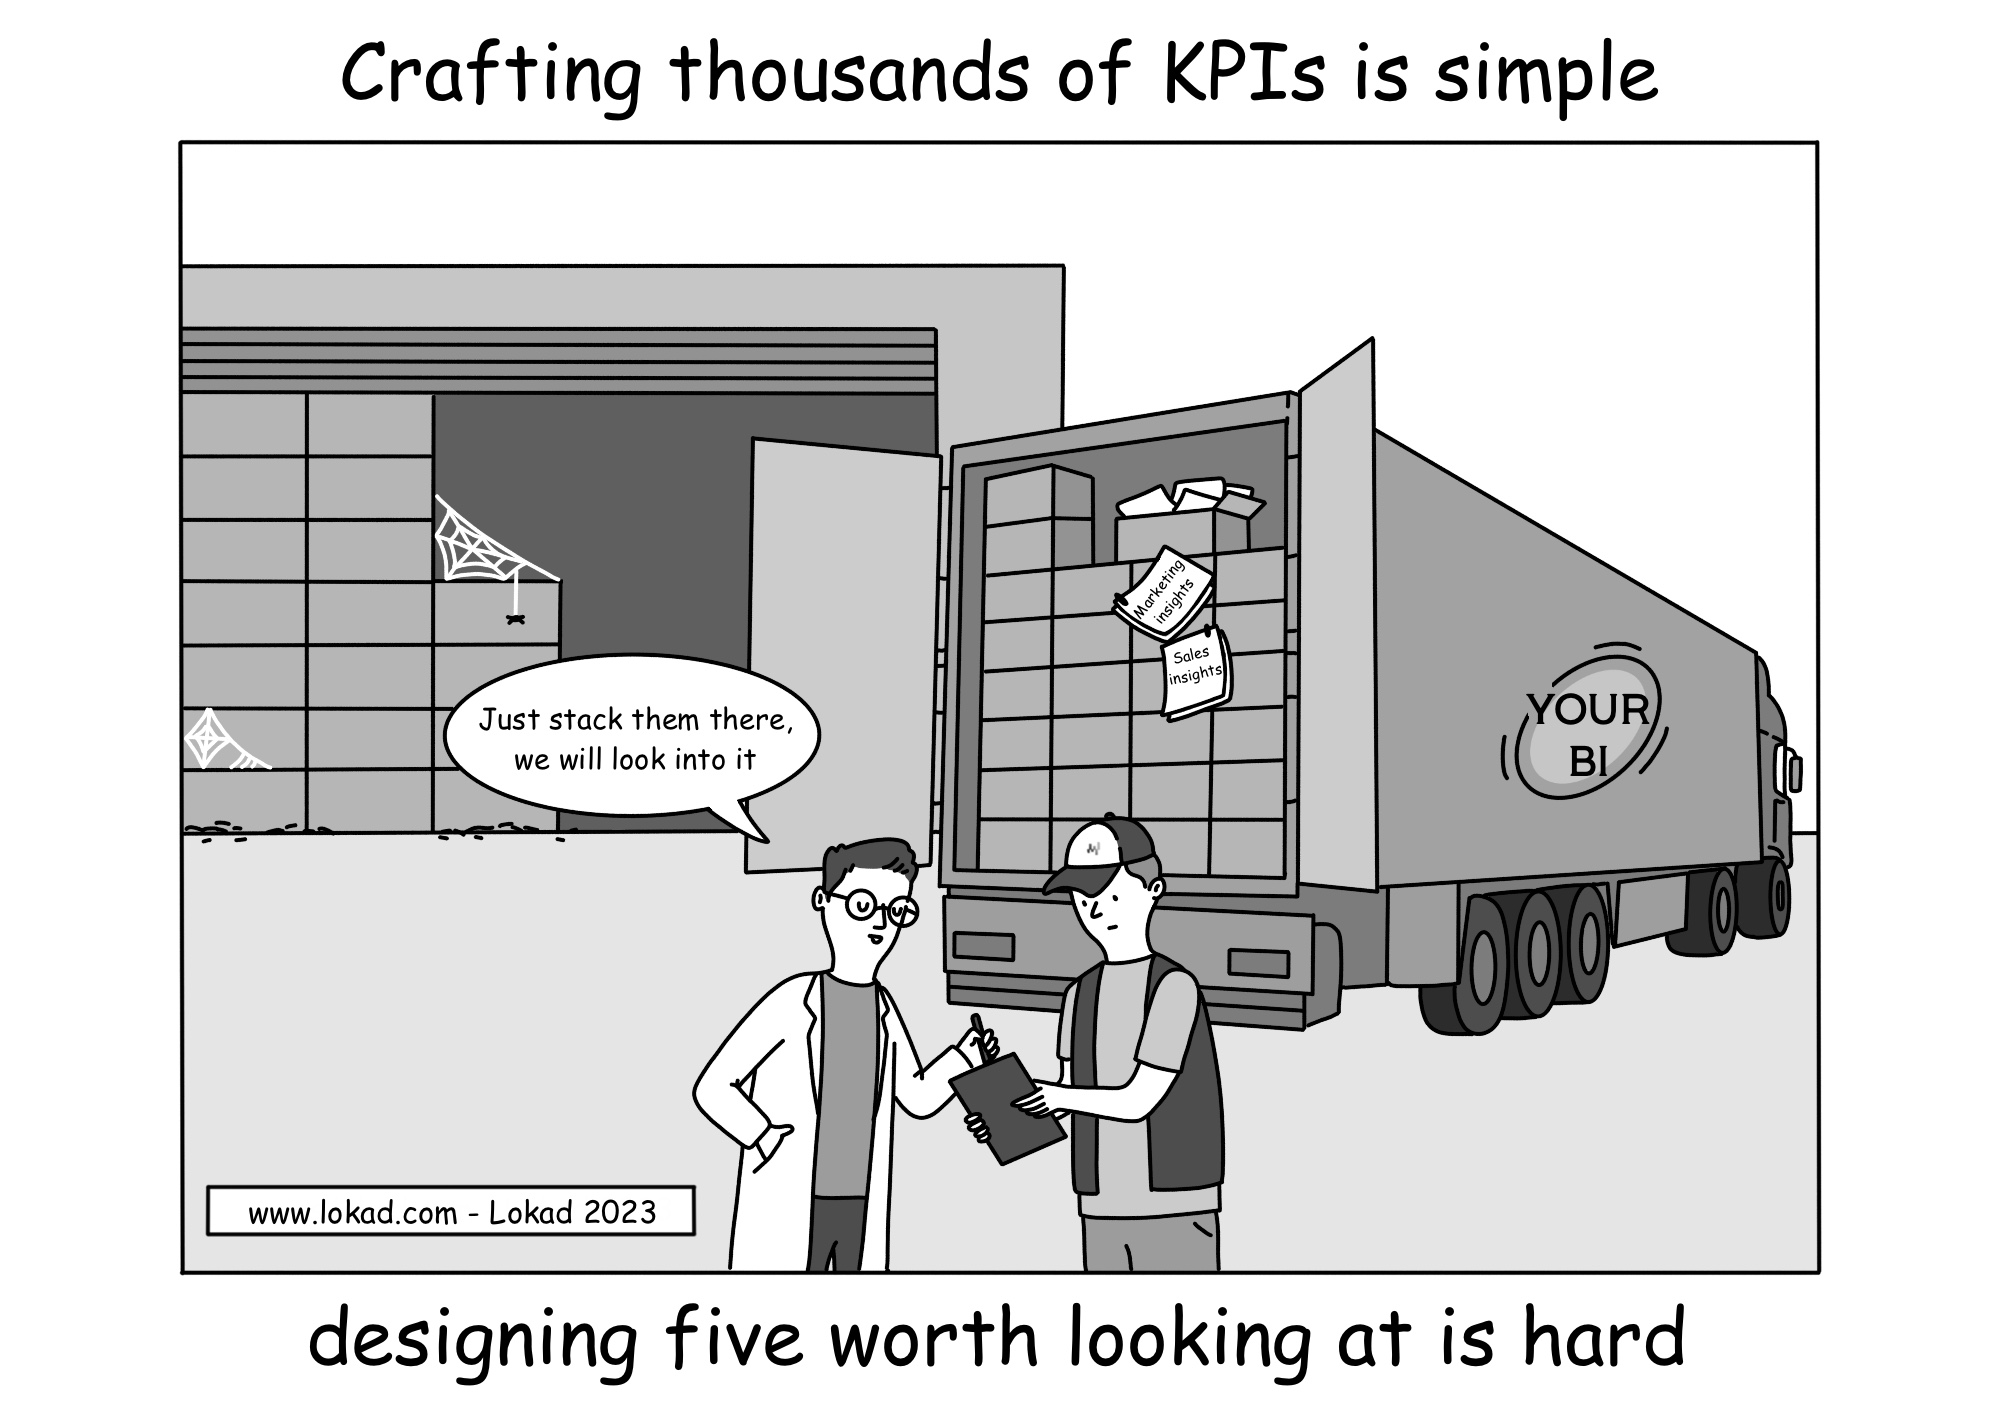 Crafting thousands of KPIs is simple